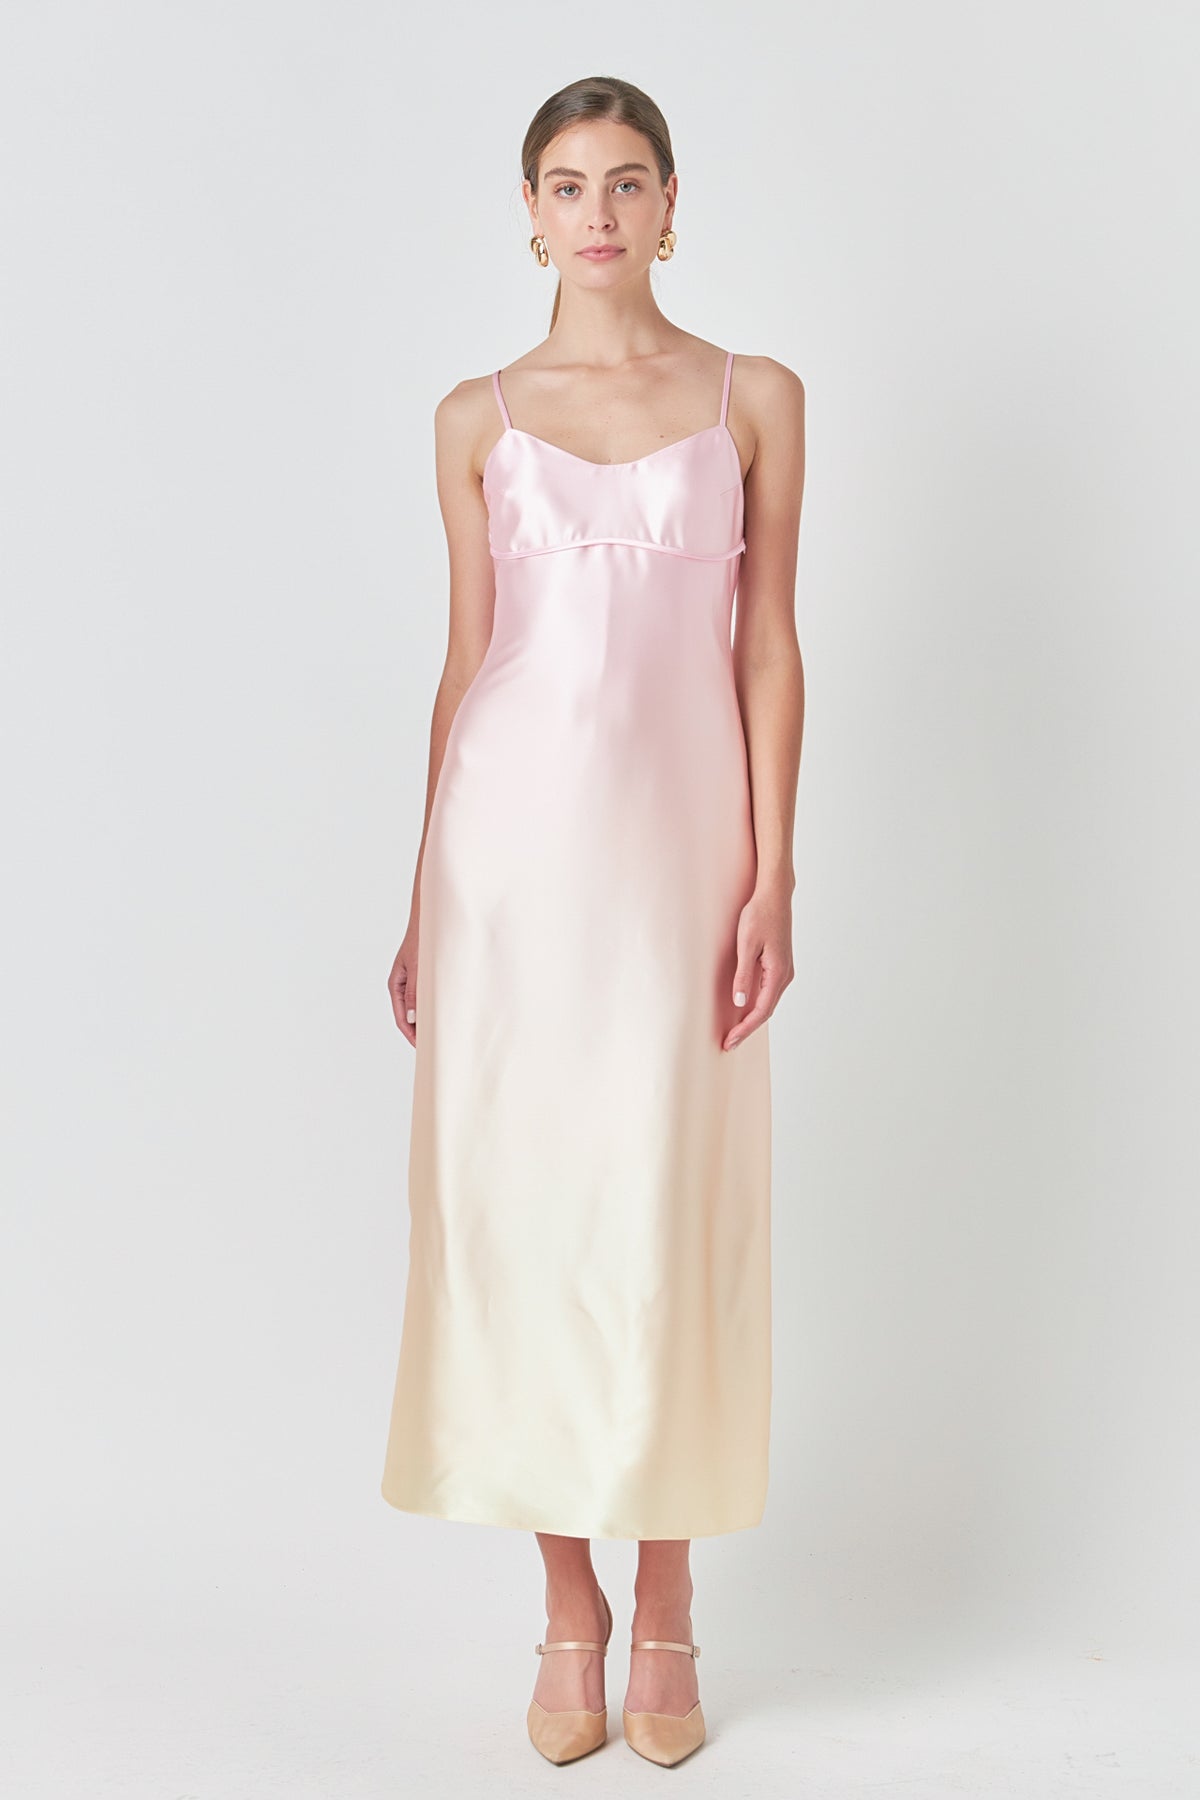 ENDLESS ROSE - Ombre Sleeveless Midi Dress - DRESSES available at Objectrare